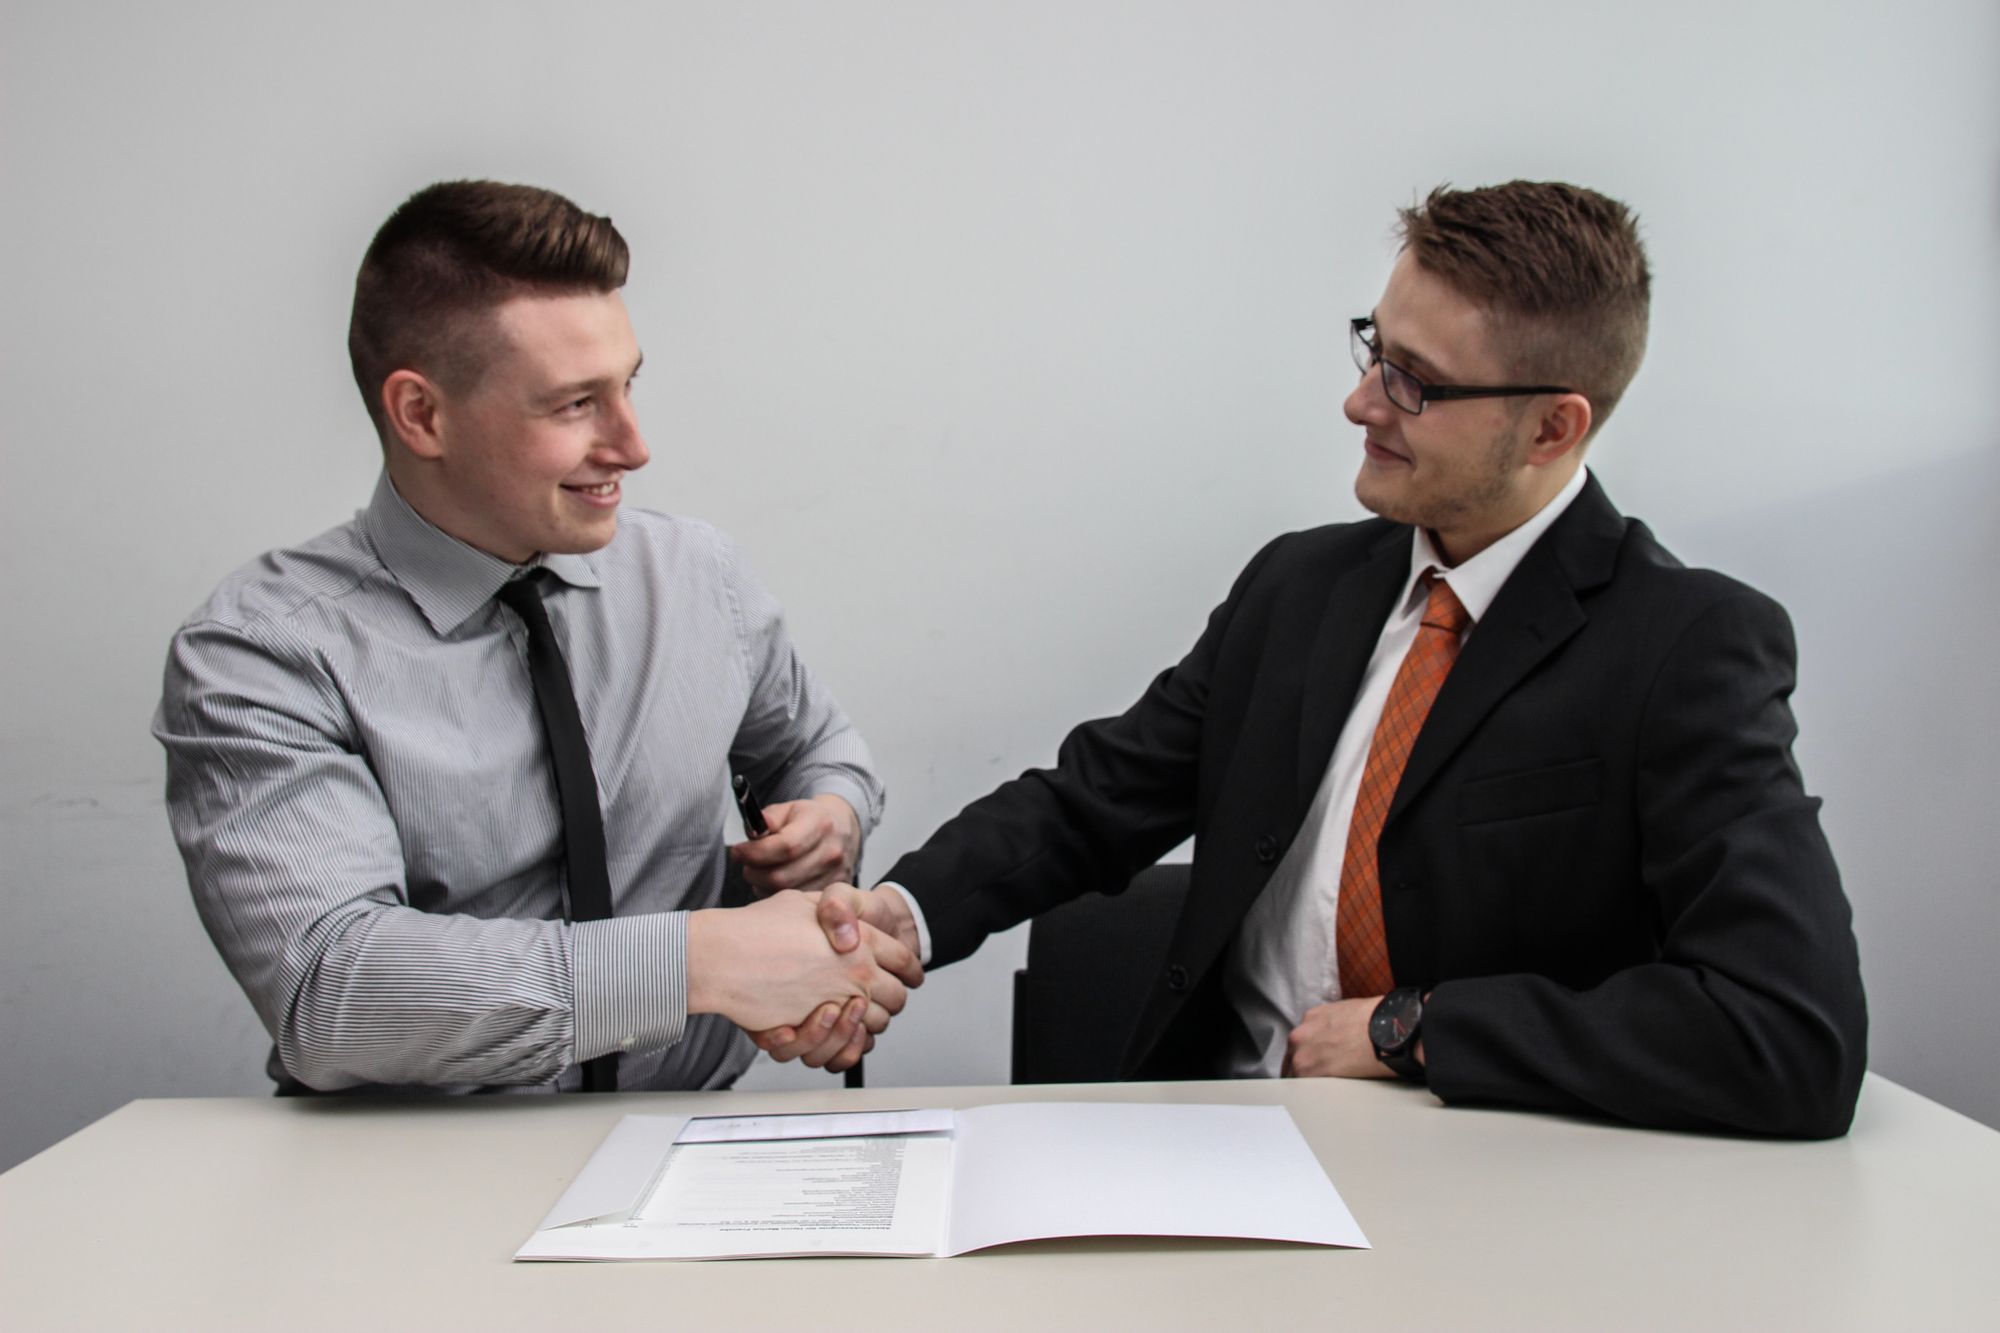 The Pros and Cons of Internal and External Recruitment